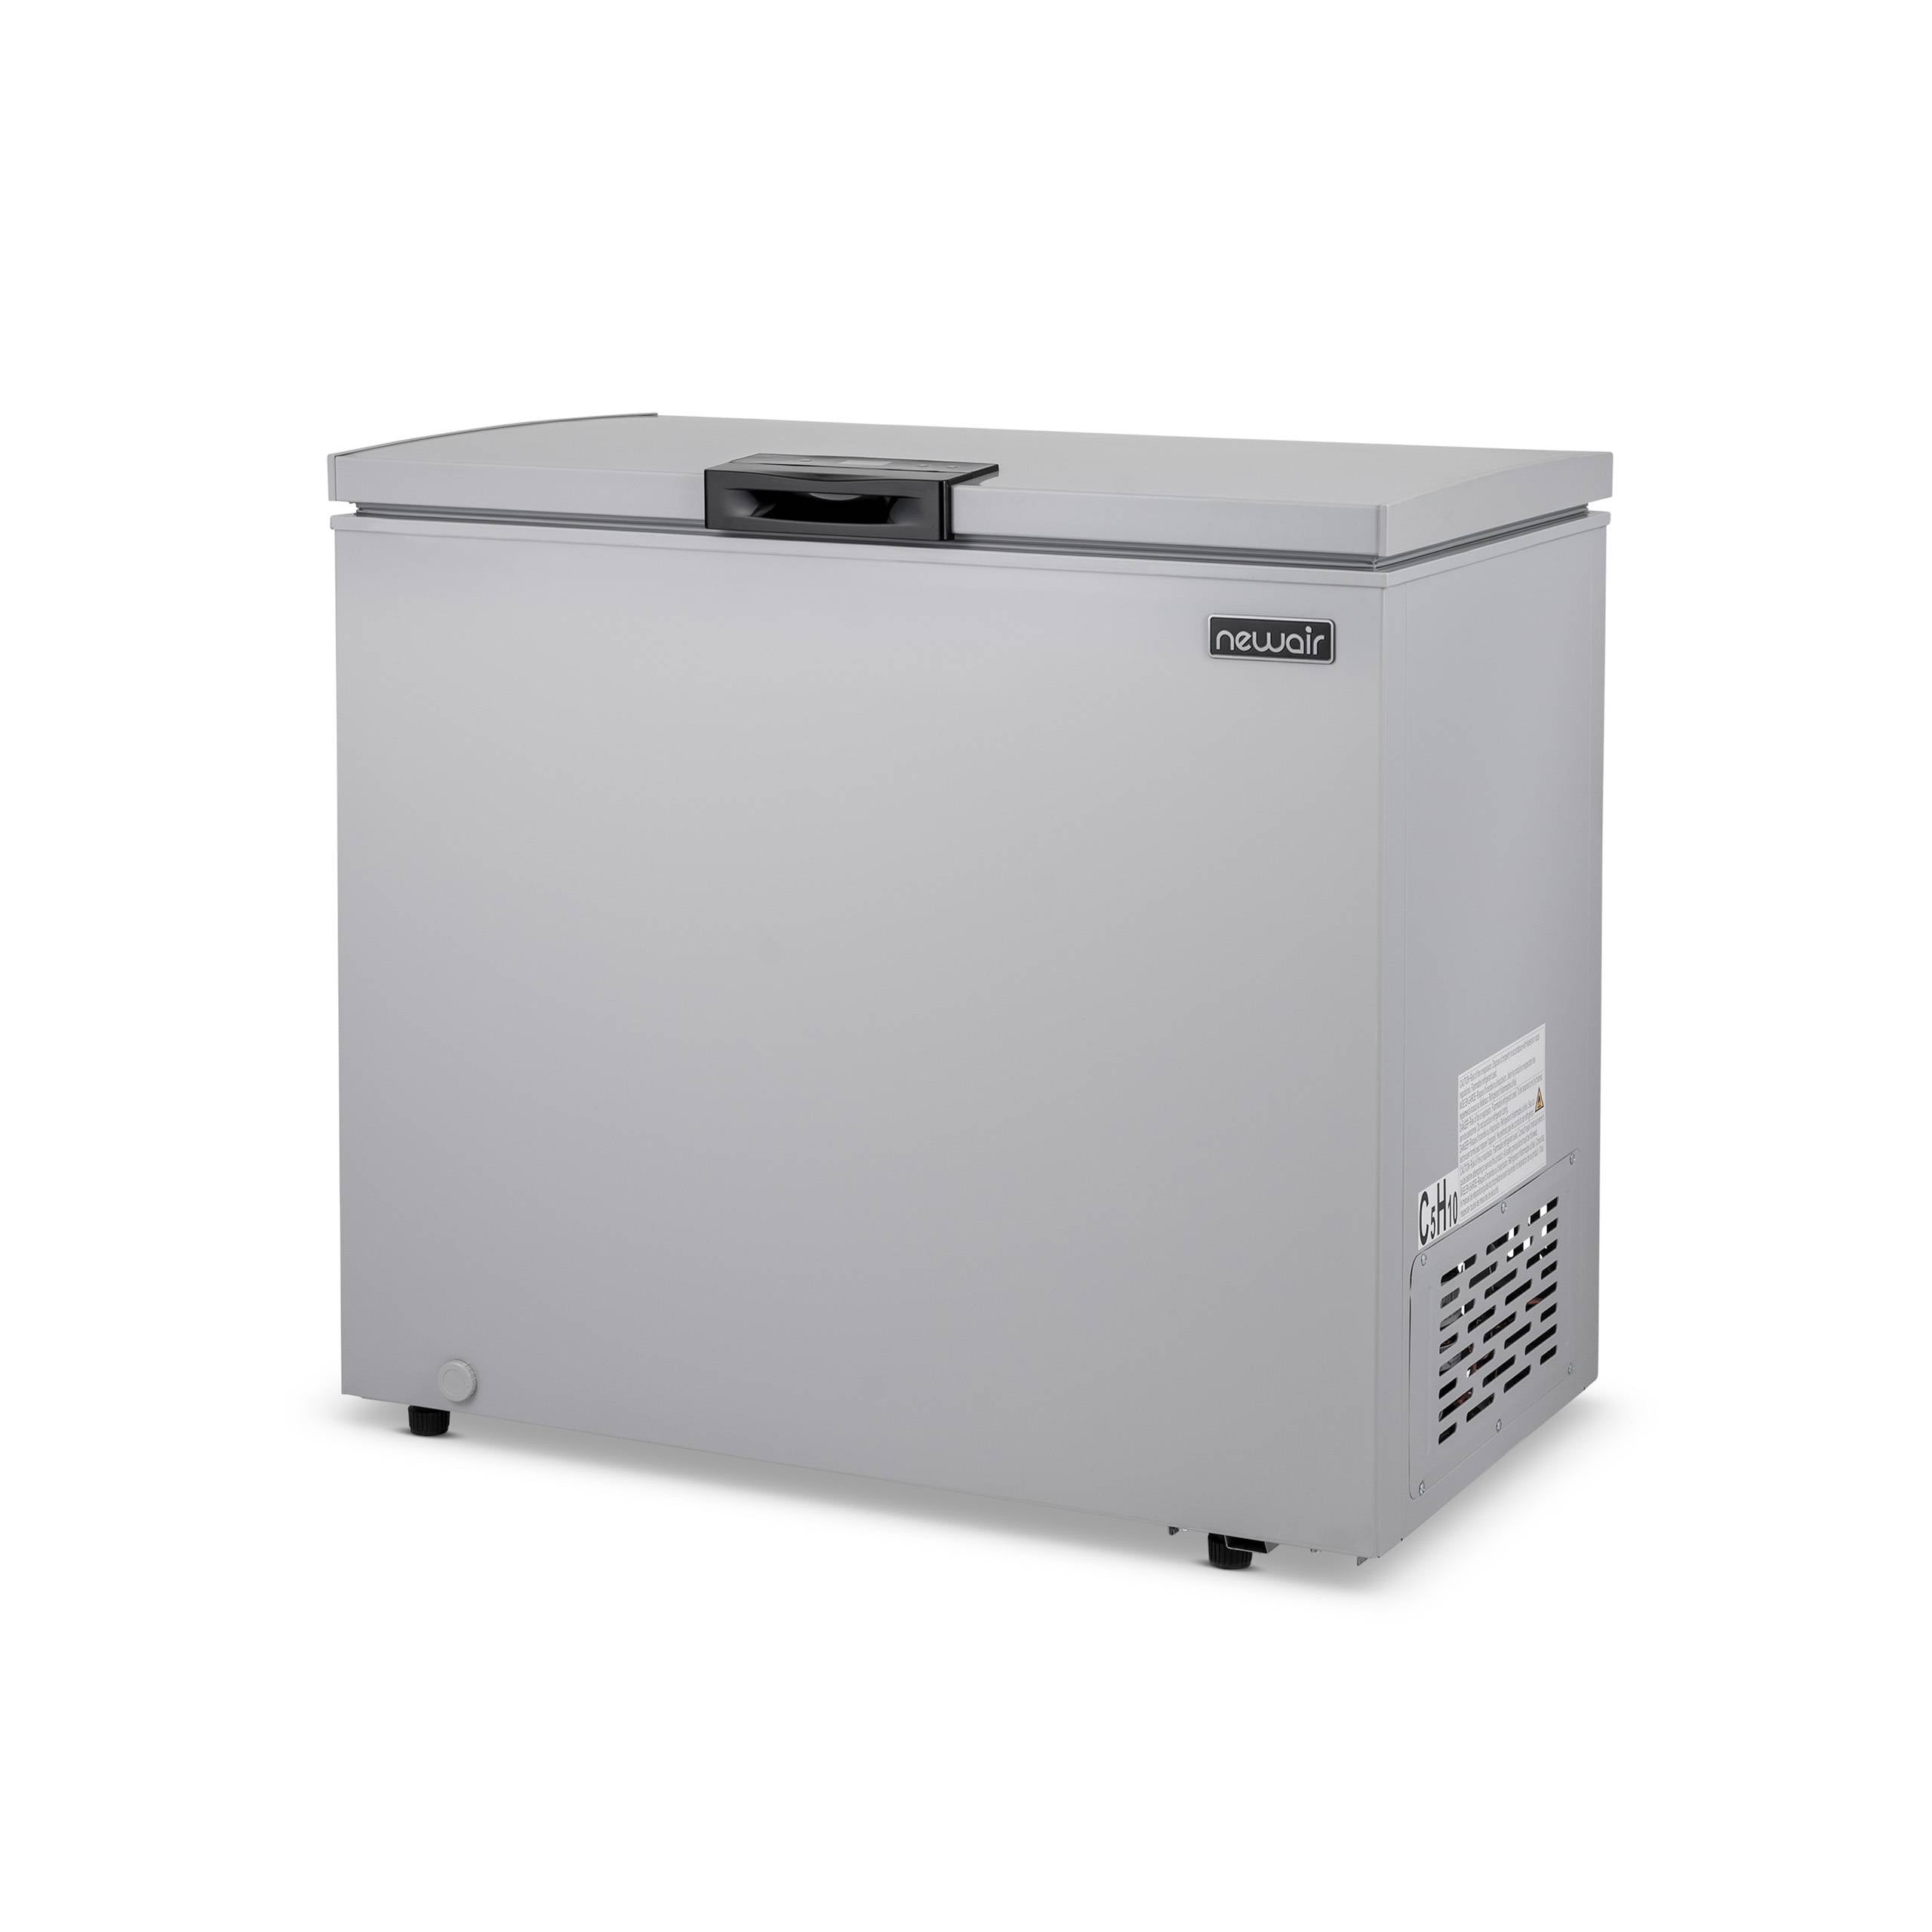 Newair 5 Cu. Ft. Mini Deep Chest Freezer and Refrigerator in Cool